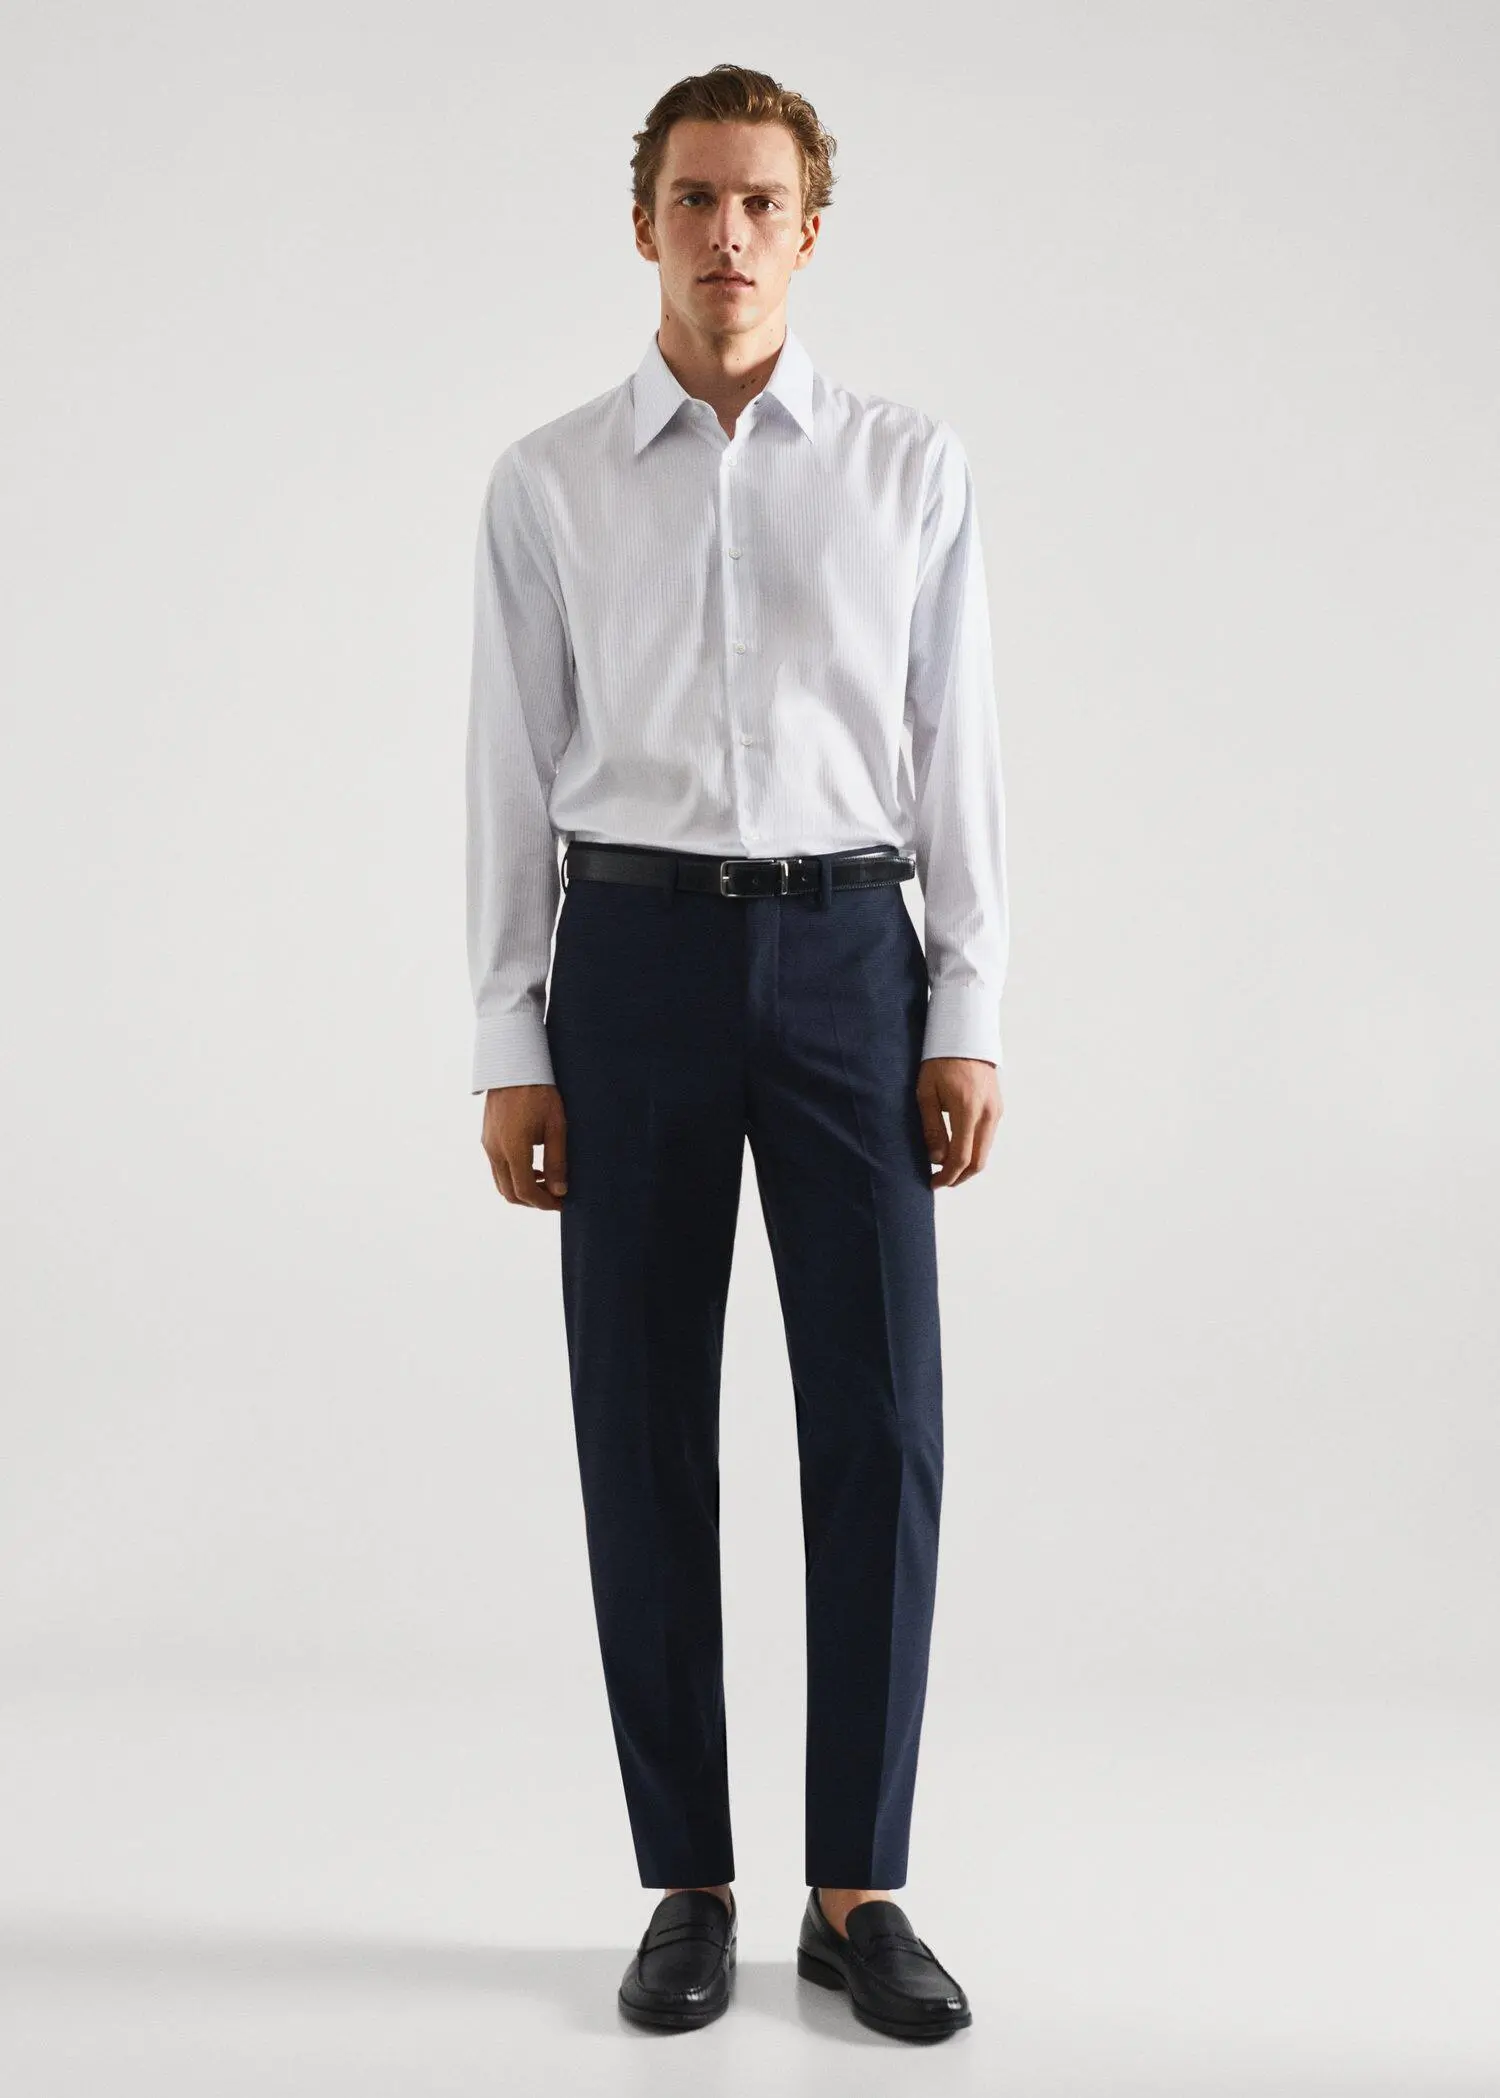 Mango Slim-fit striped cotton twill suit shirt. a man in a white shirt and black pants. 